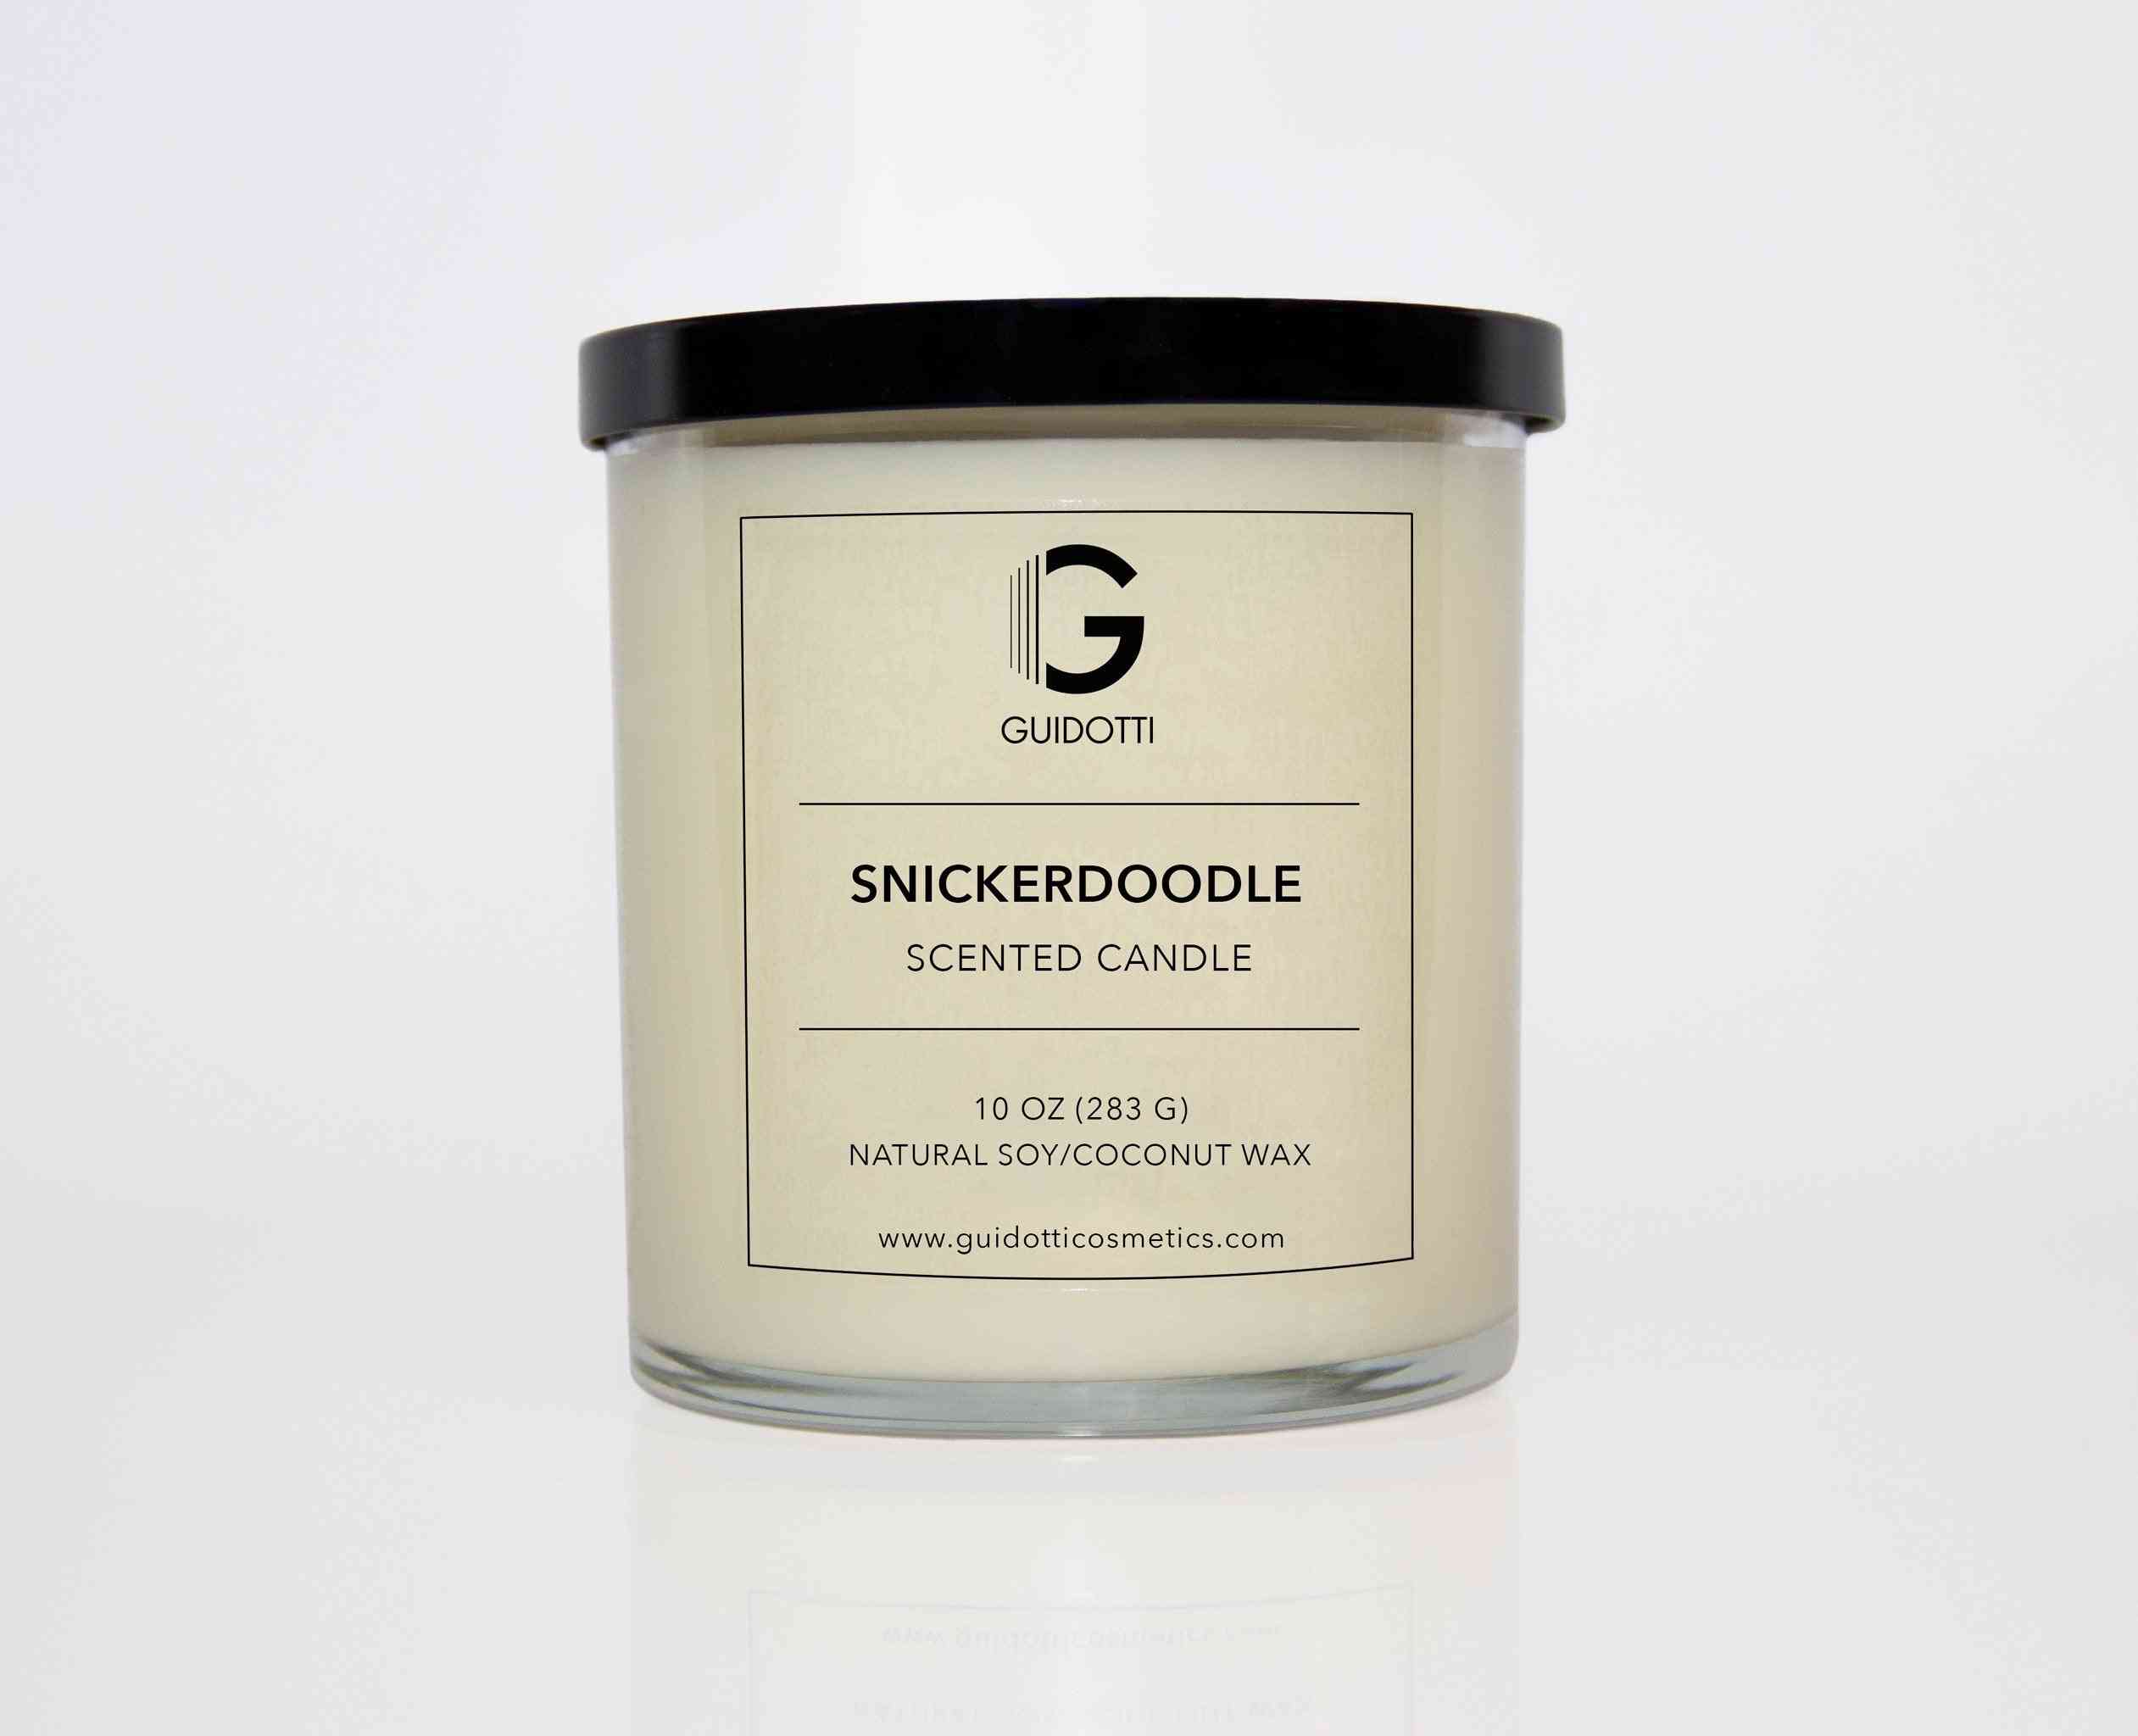 Snickerdoodle Scented Soy Candle